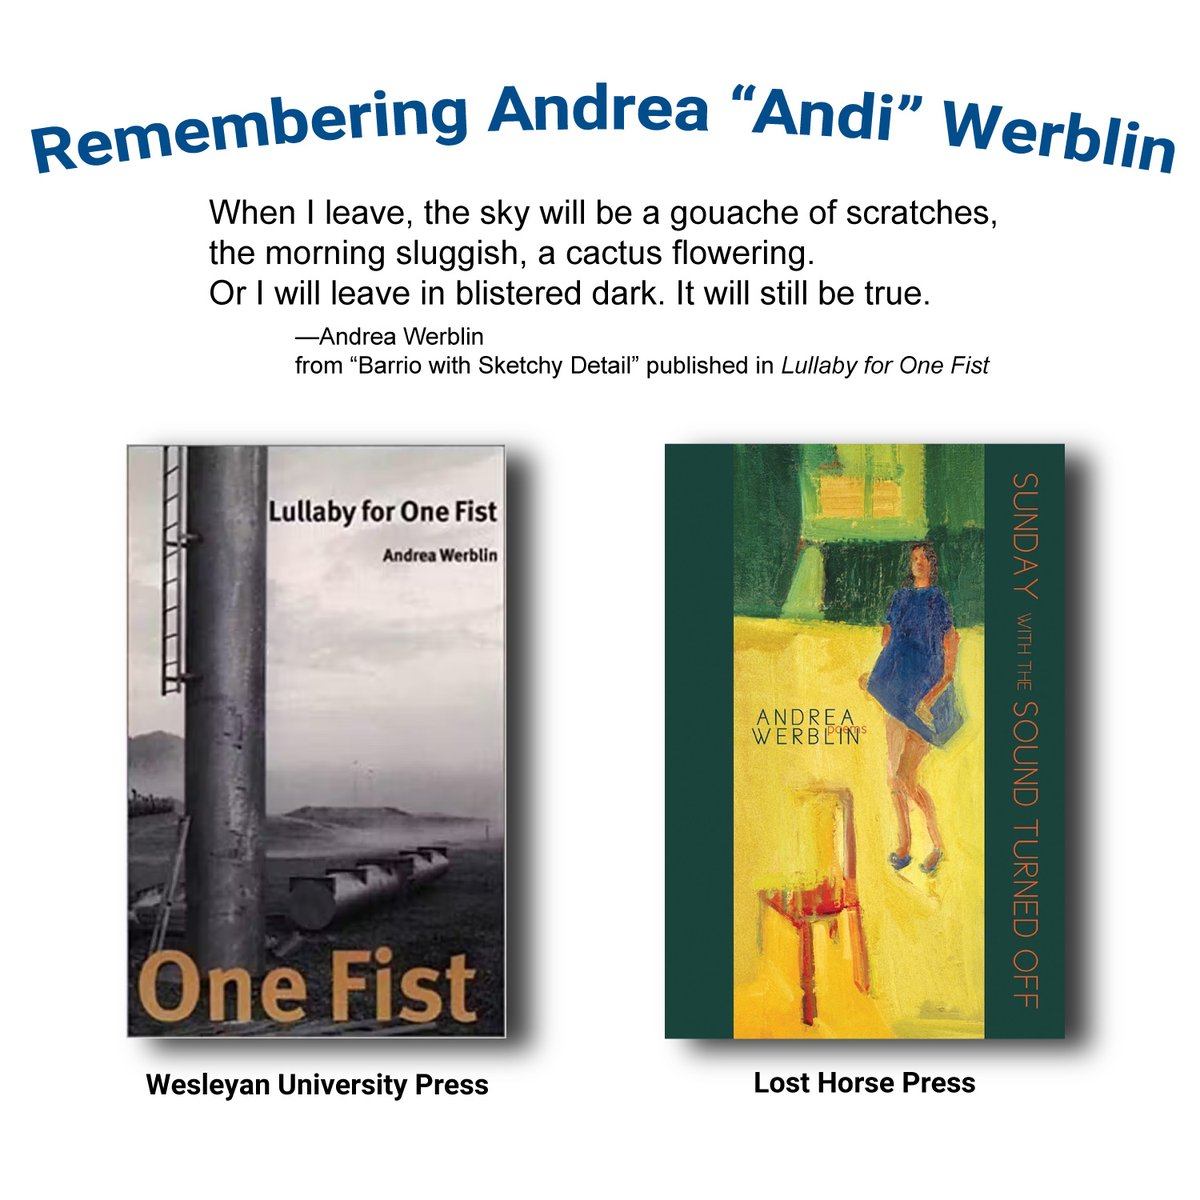 test Twitter Media - We're deeply saddened to learn of the passing of Andrea “Andi” Werblin Reid (11/30/1969–8/5/2022). Read about Andi & help celebrate her life well lived. 
https://t.co/wHoYSb7haC
#LullabyForOneFist #SundayWithTheSoundTurnedOff #AndiWerblin #AndreaWerblin @losthorsepress @UWAPress https://t.co/Eas1YE2XMG